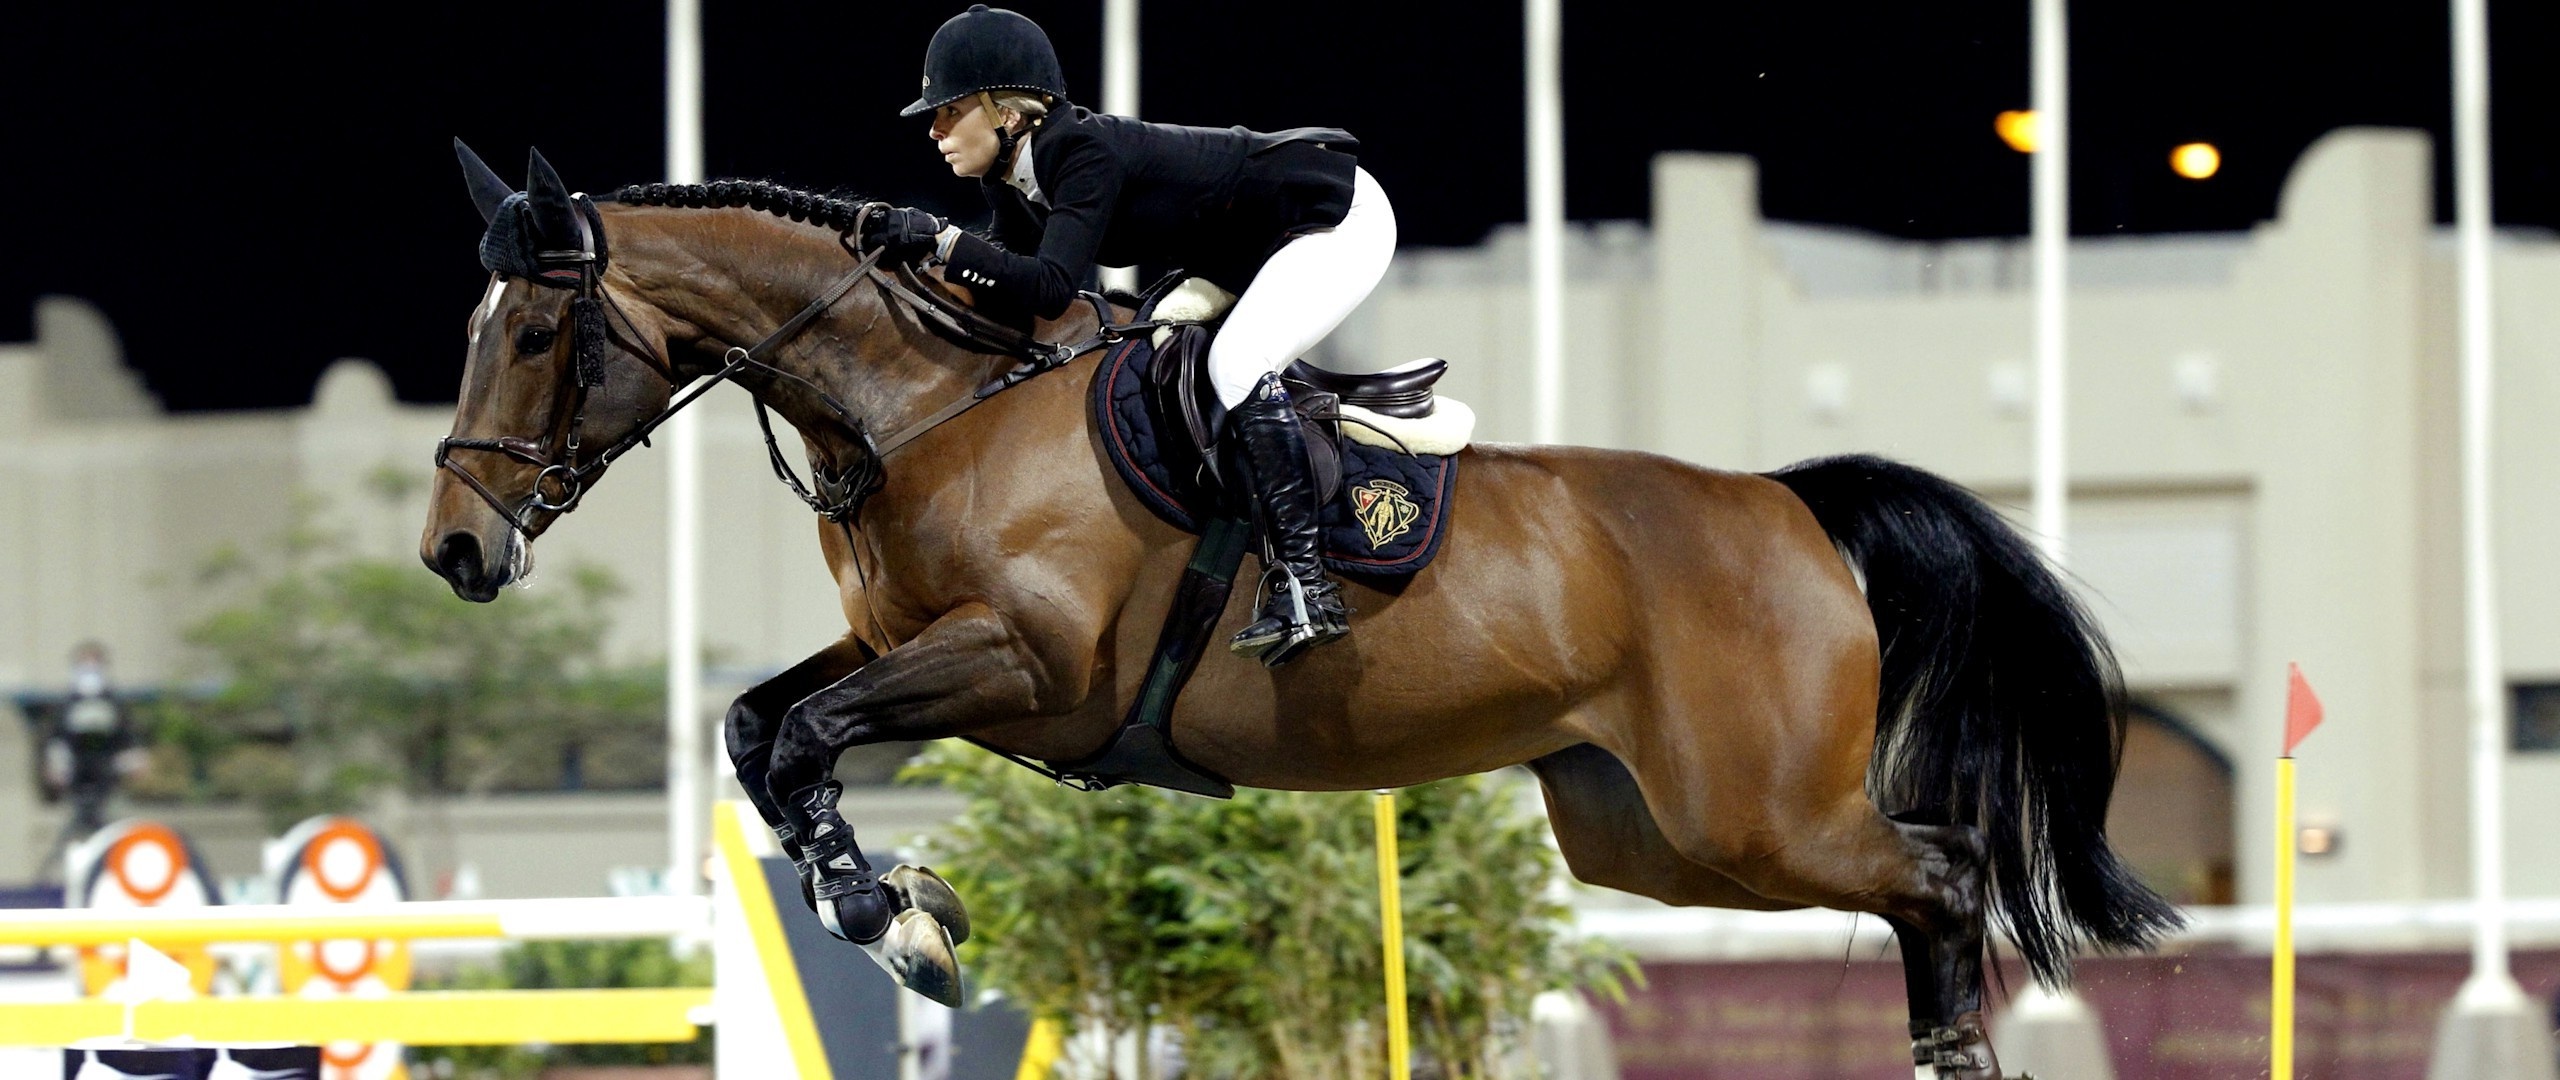 Equitation: Show jumping, A part of a group of English horse riding events that also includes dressage, eventing, hunters, and equitation. 2560x1080 Dual Screen Background.